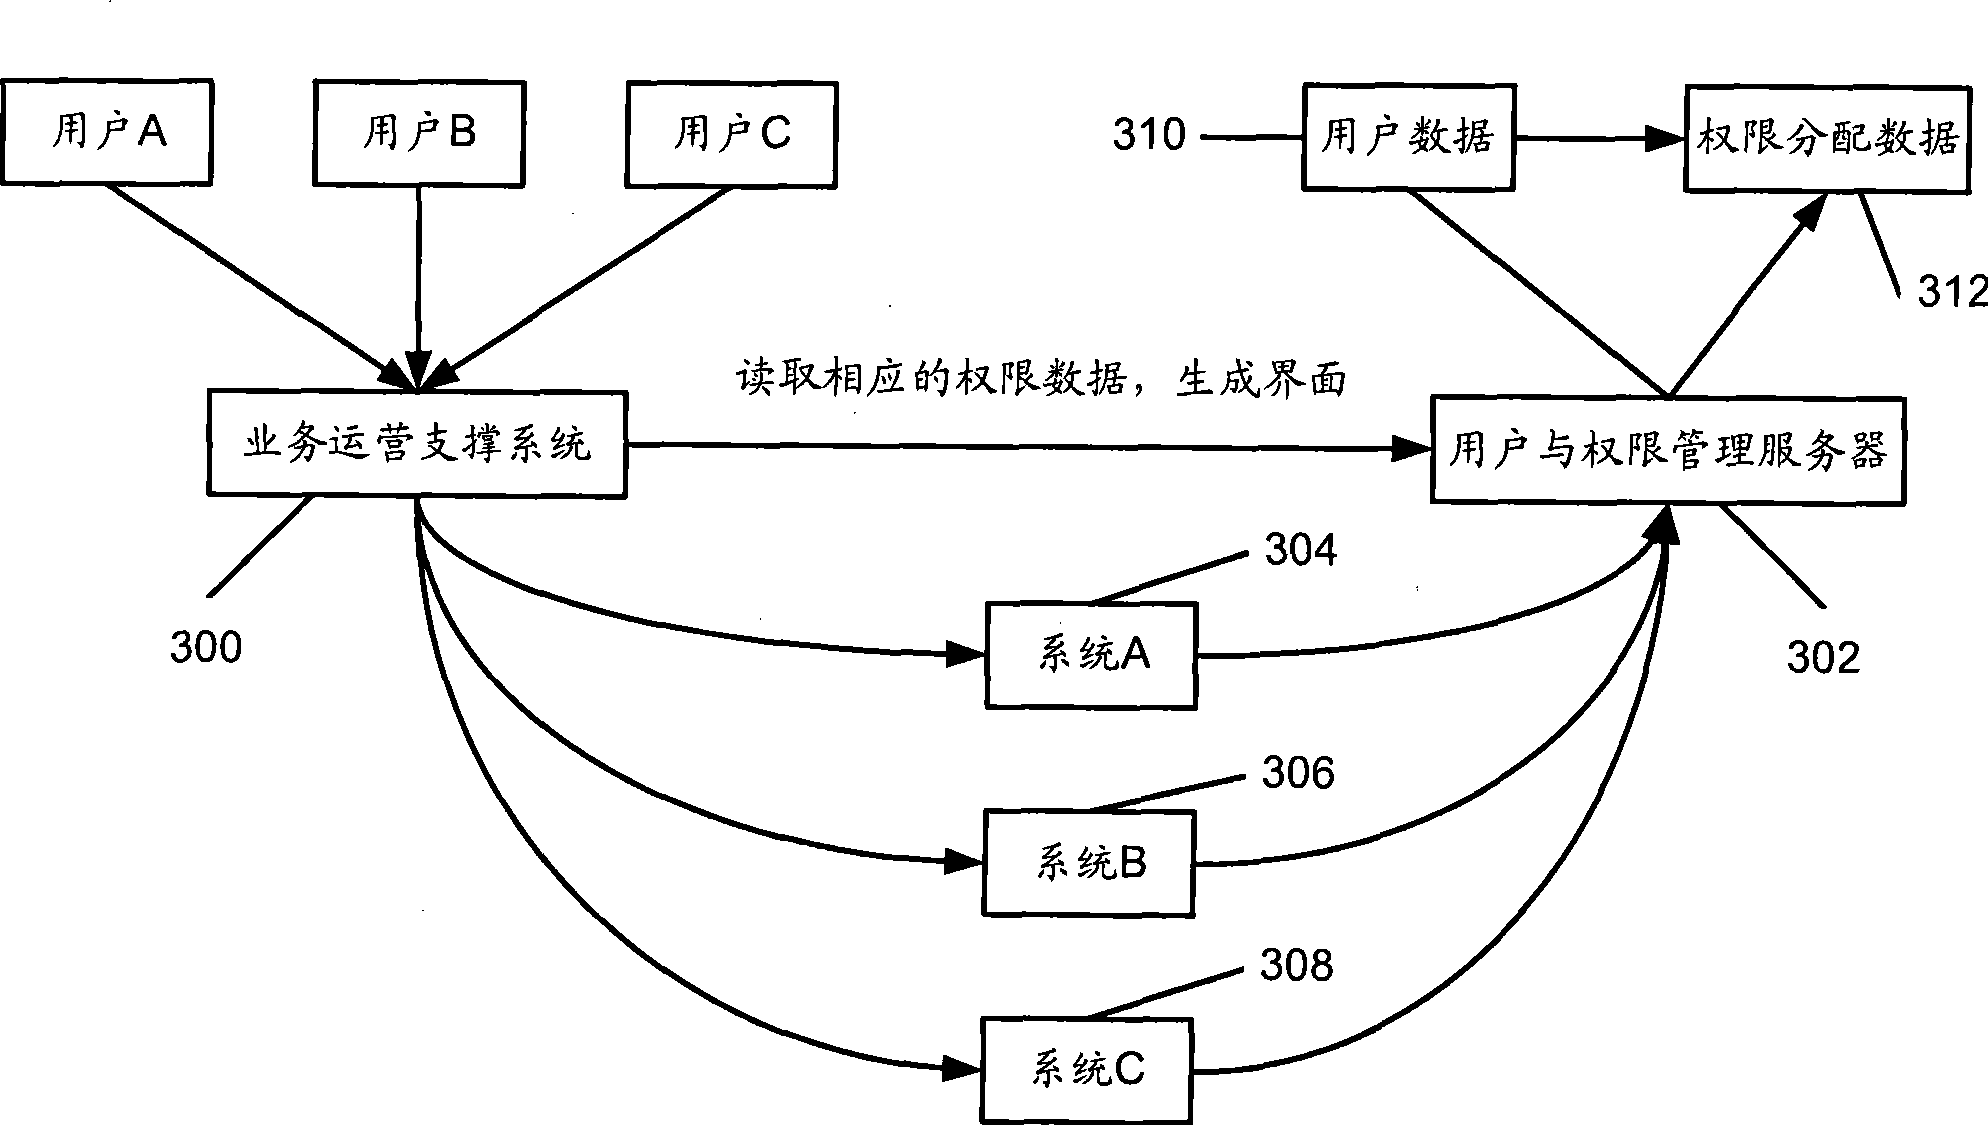 Distributed business operation support system and method for implementing distributed business